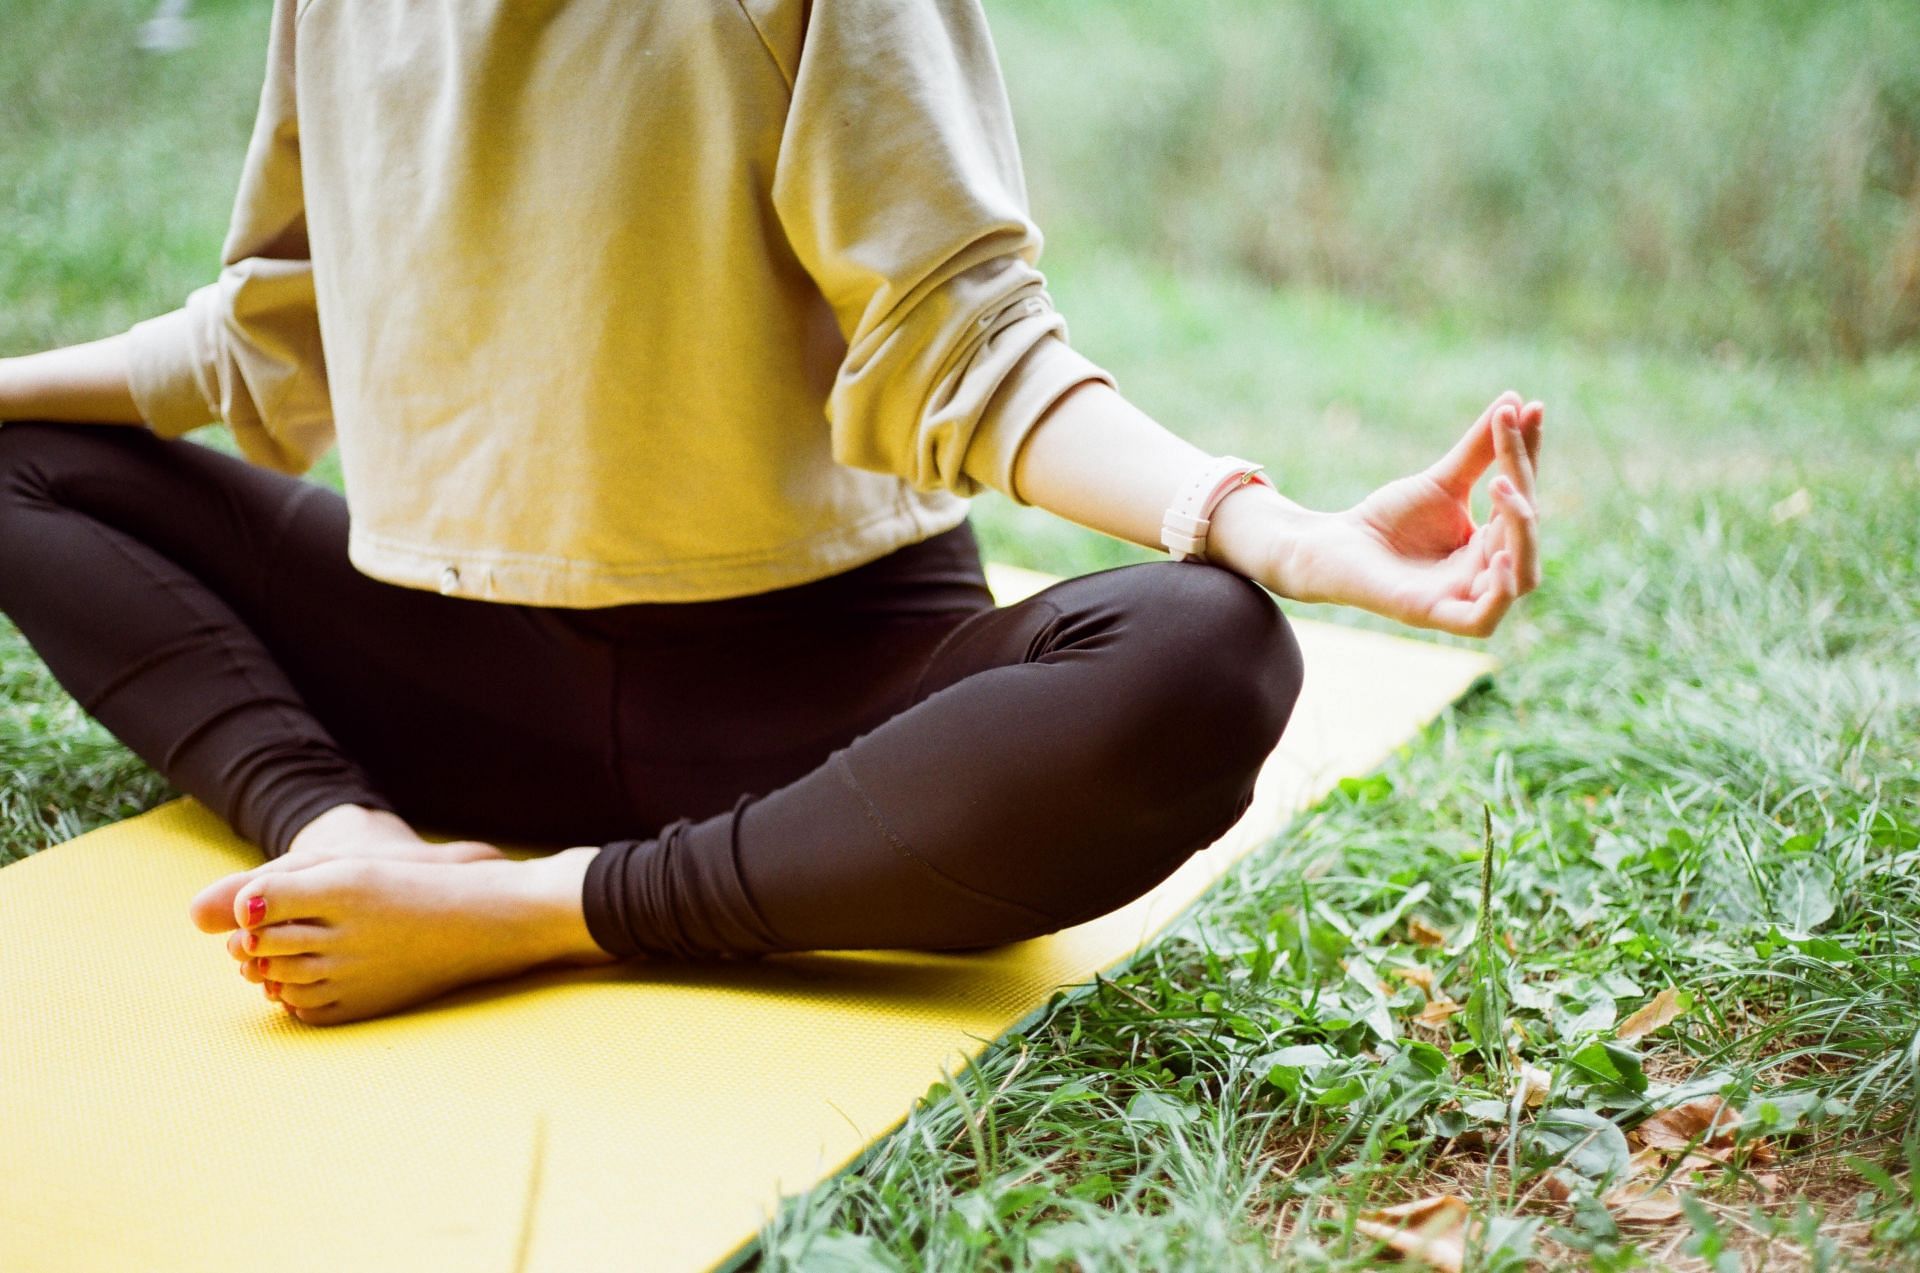 Why do we need to sit in Padmasana while doing yoga? - Quora